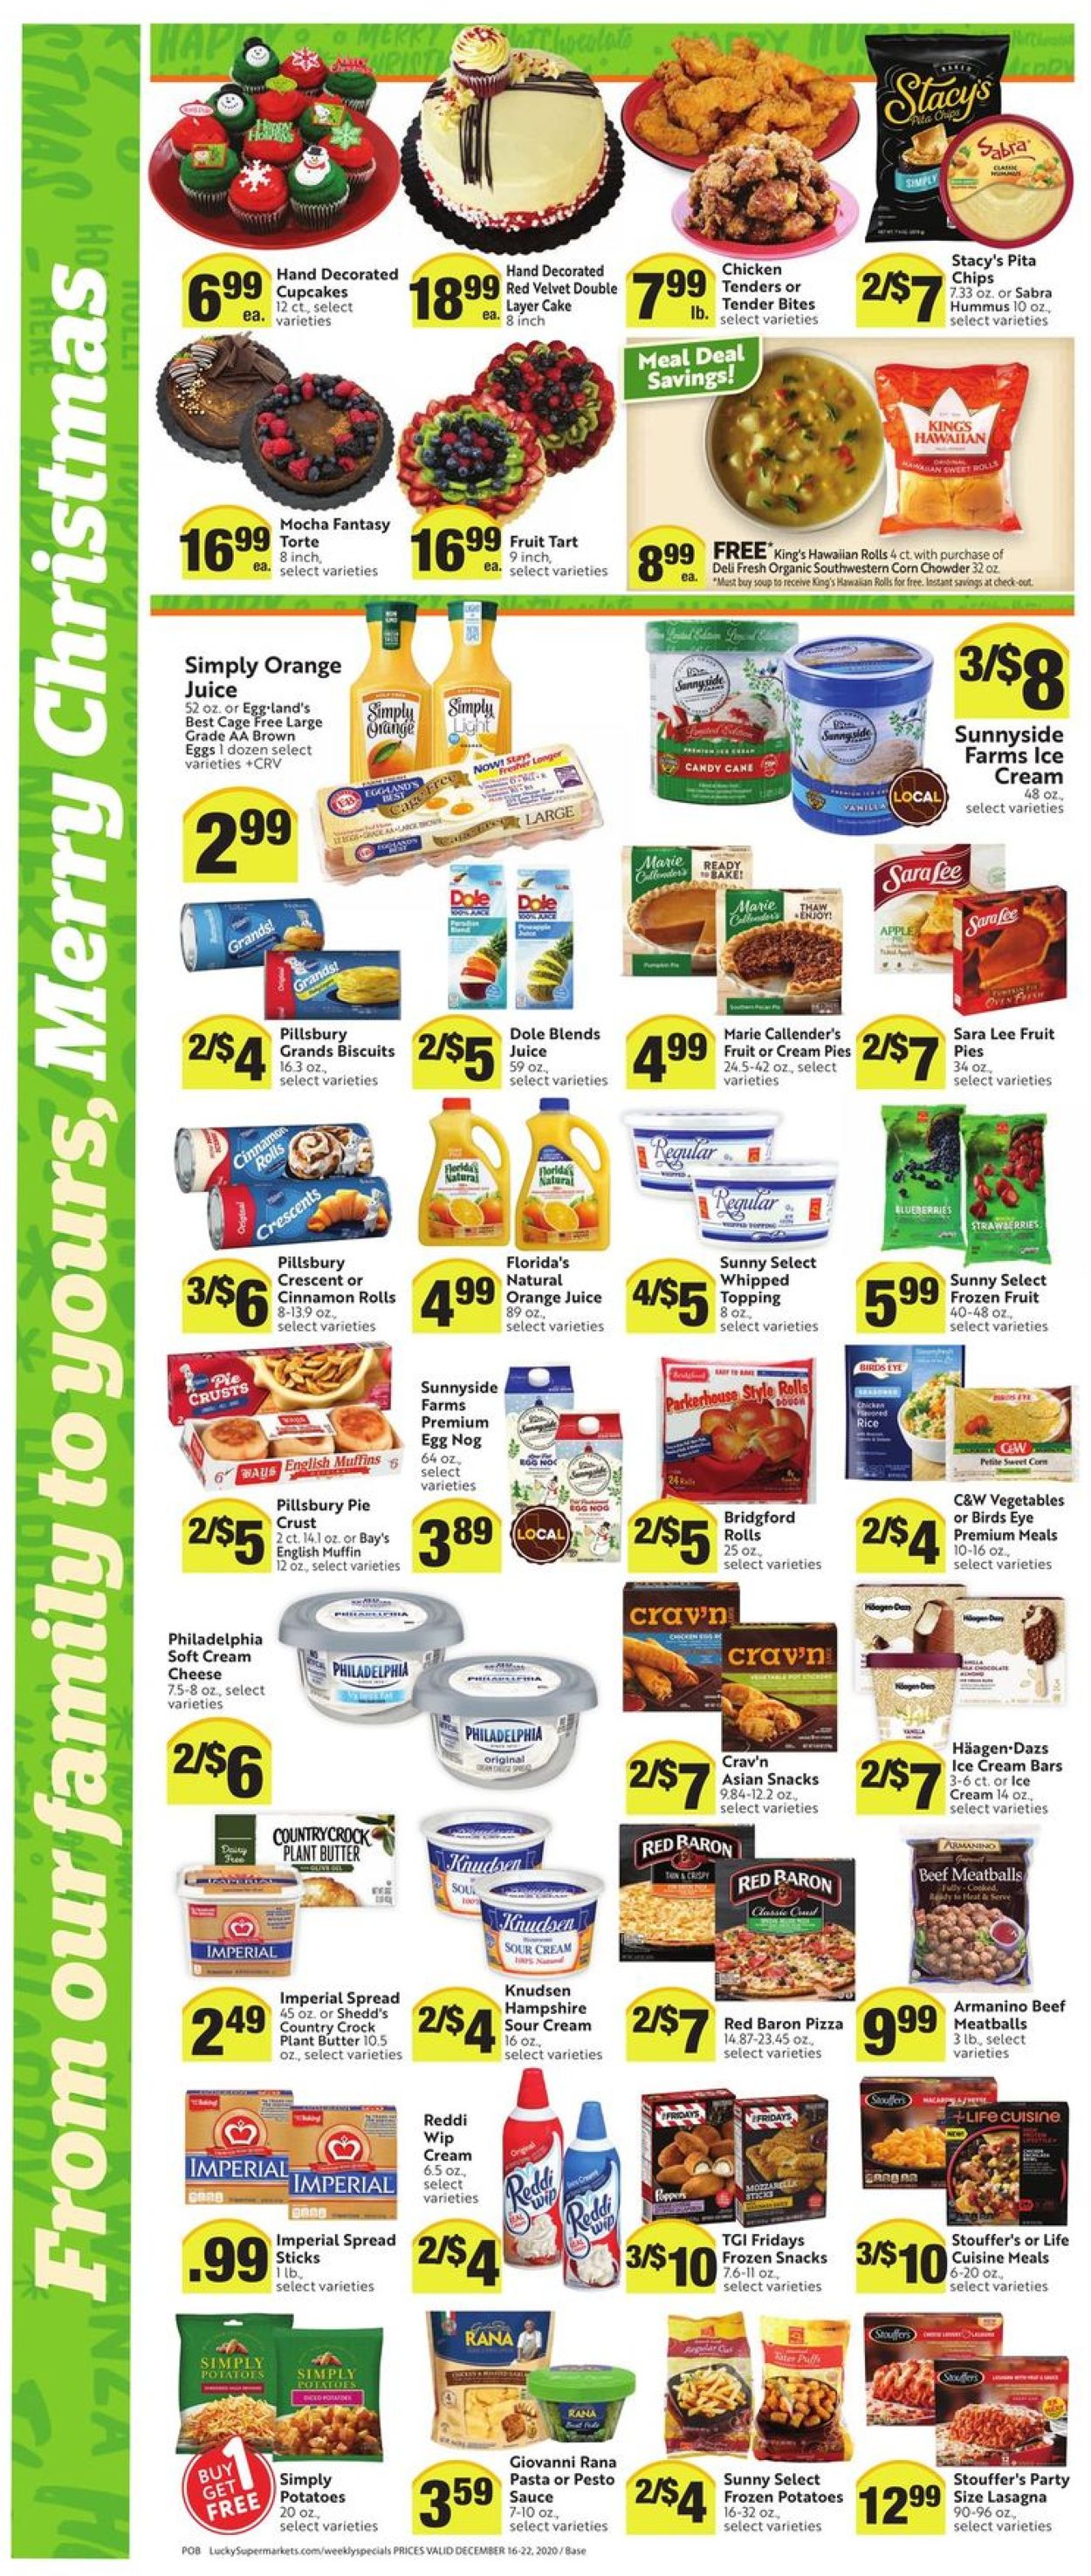 Lucky Supermarkets Christmas Ad 2020 Weekly Ad Circular - valid 12/16-12/22/2020 (Page 6)